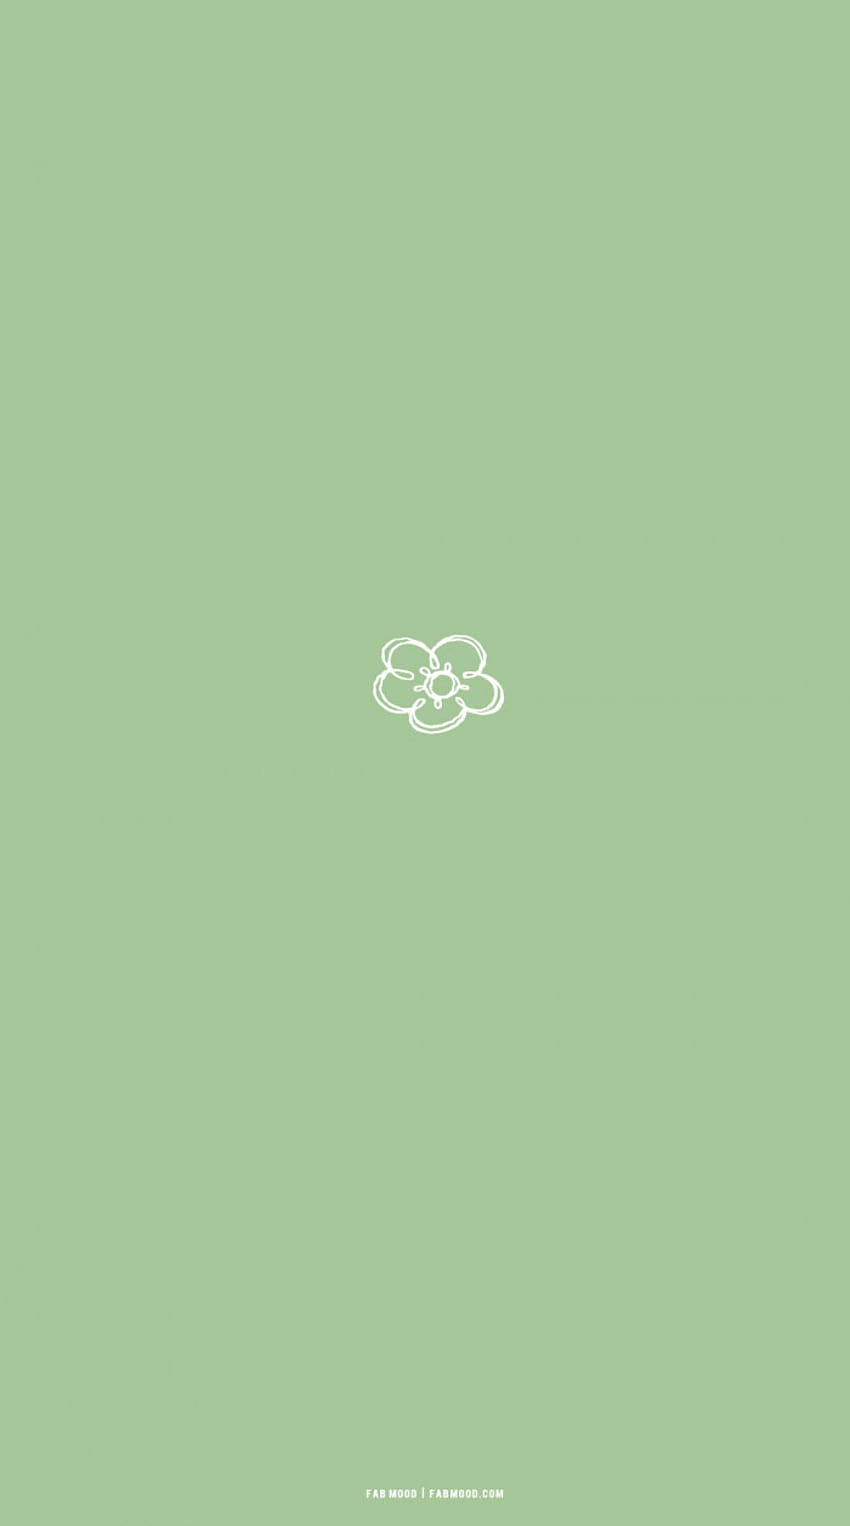 Aesthetic phone wallpaper with a white flower on a green background - Sage green